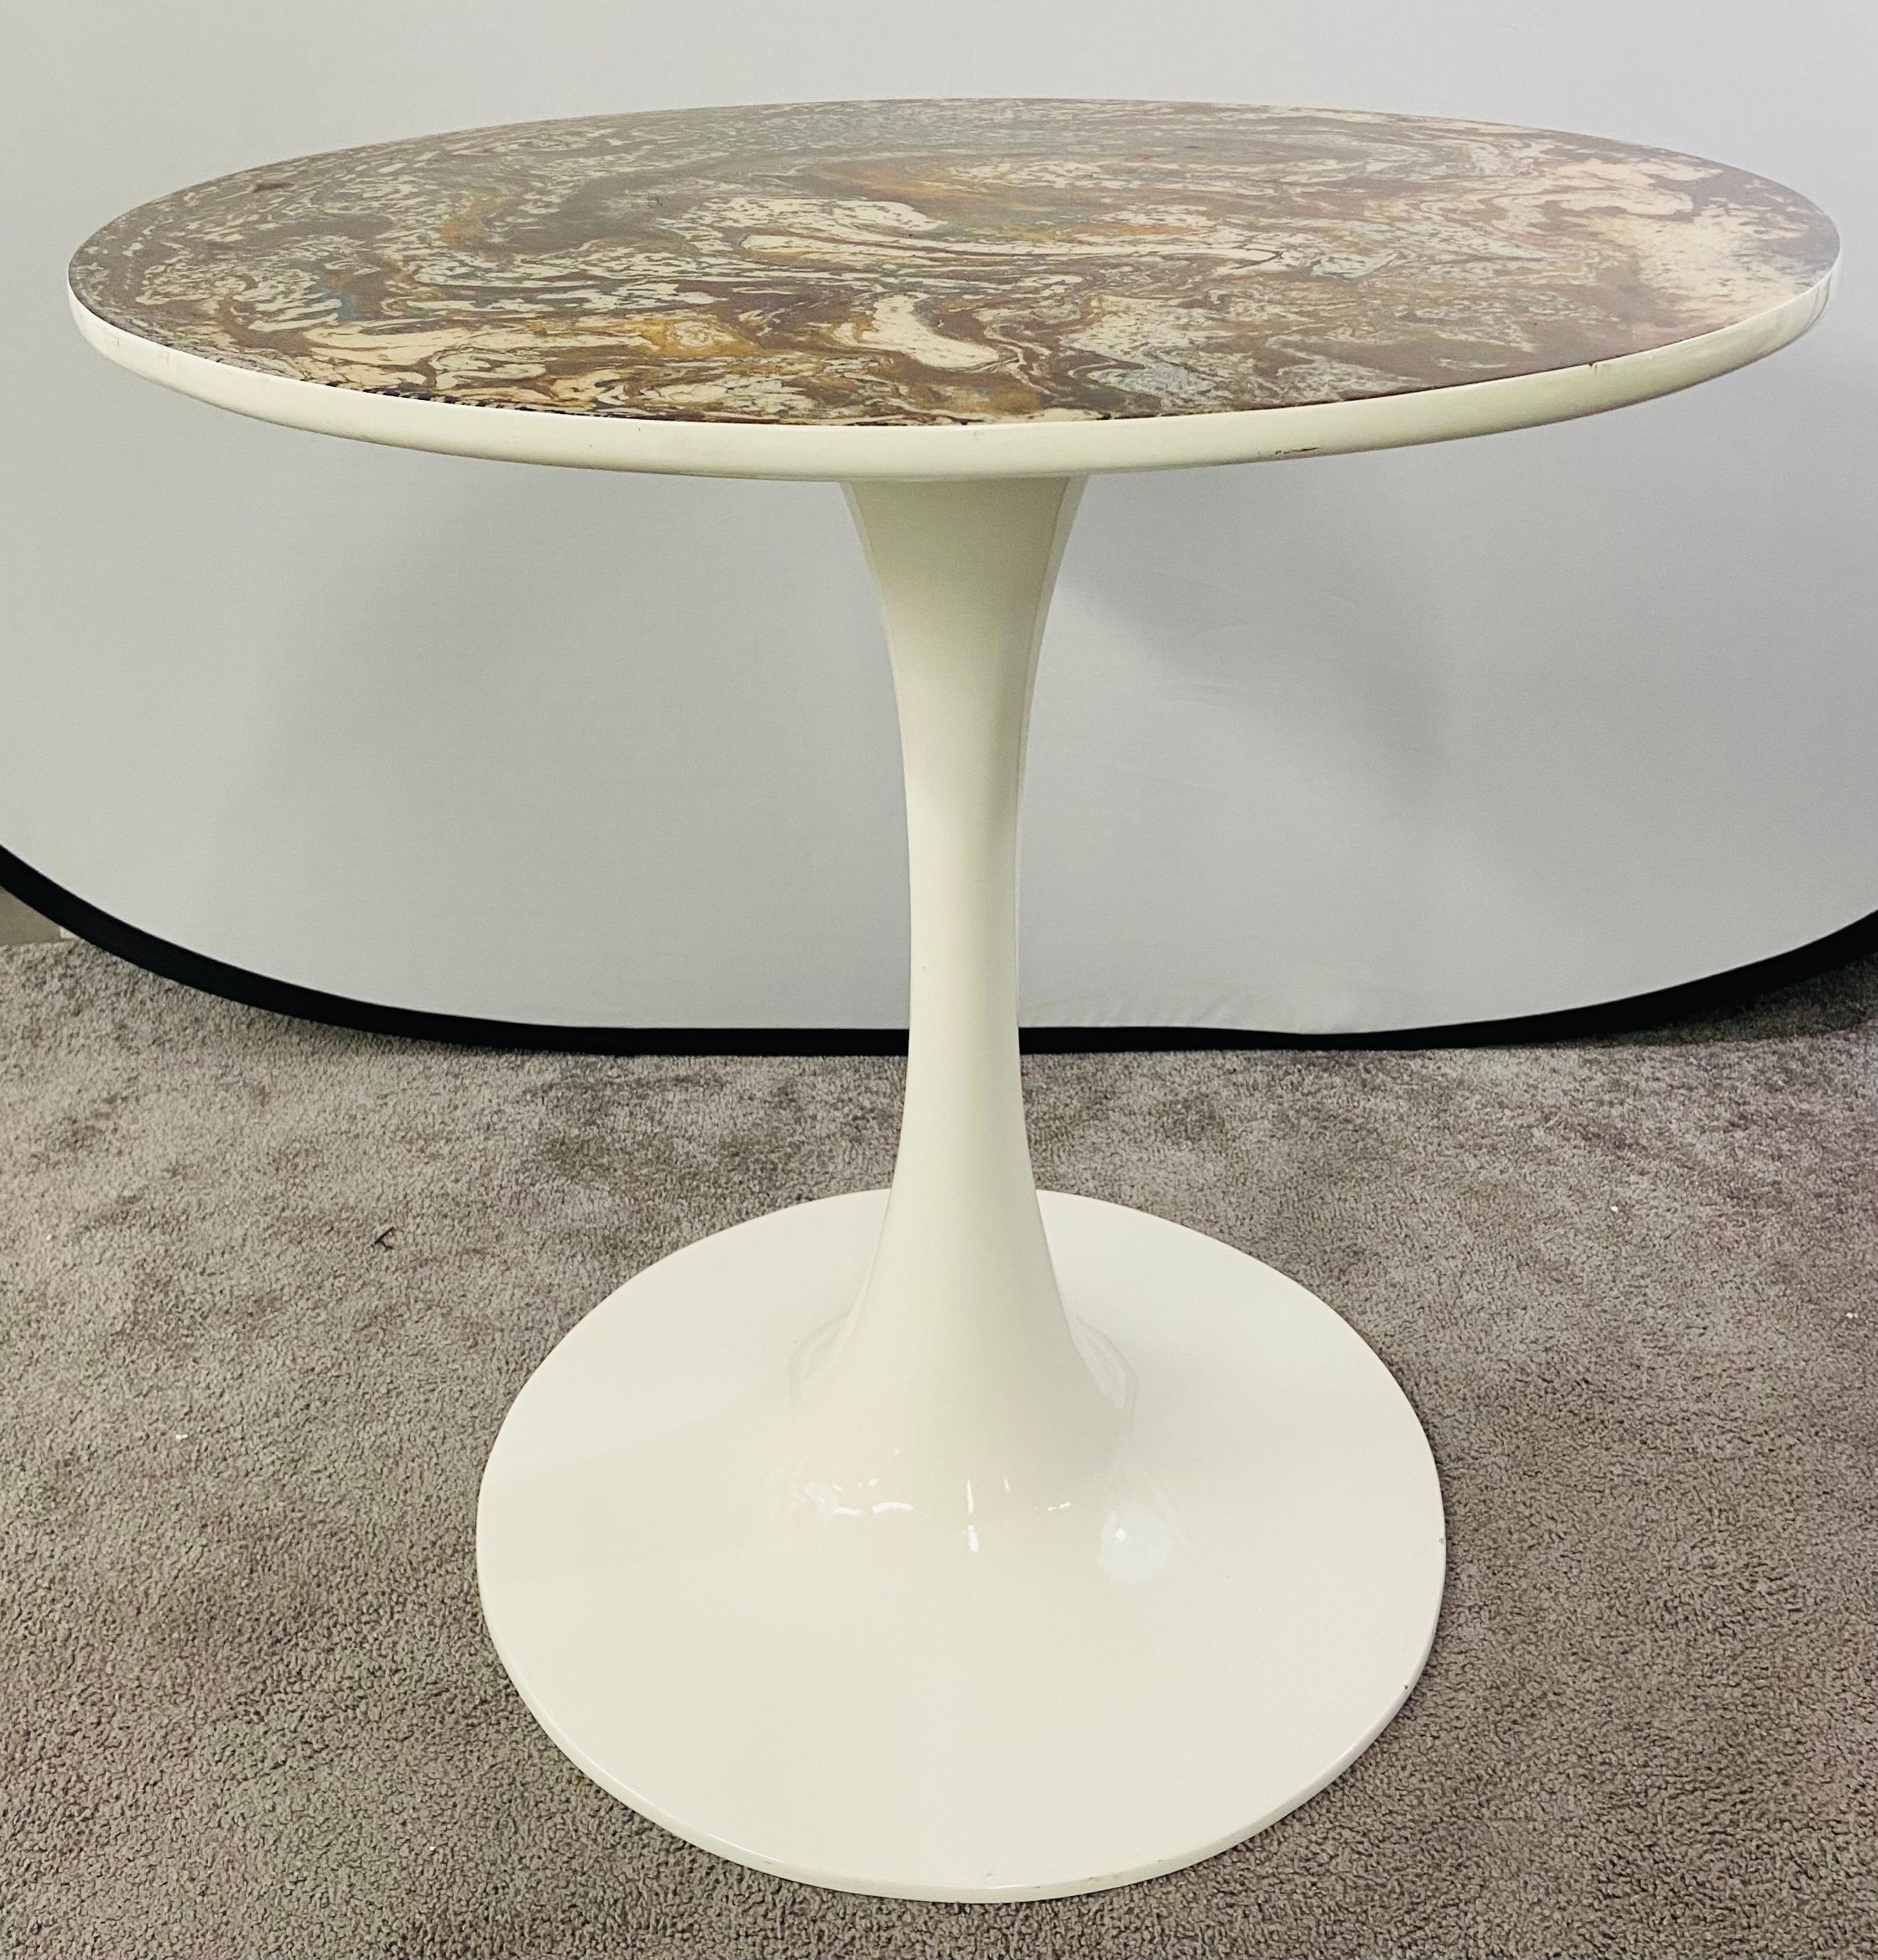 A Mid Century Modern Style Pedestal circular or round center or end table in the manner of Eero Saarinen iconic tulip table. The round shaped table top is made of Epoxy resin featuring amazing abstract design in multiple colors dominated by brown